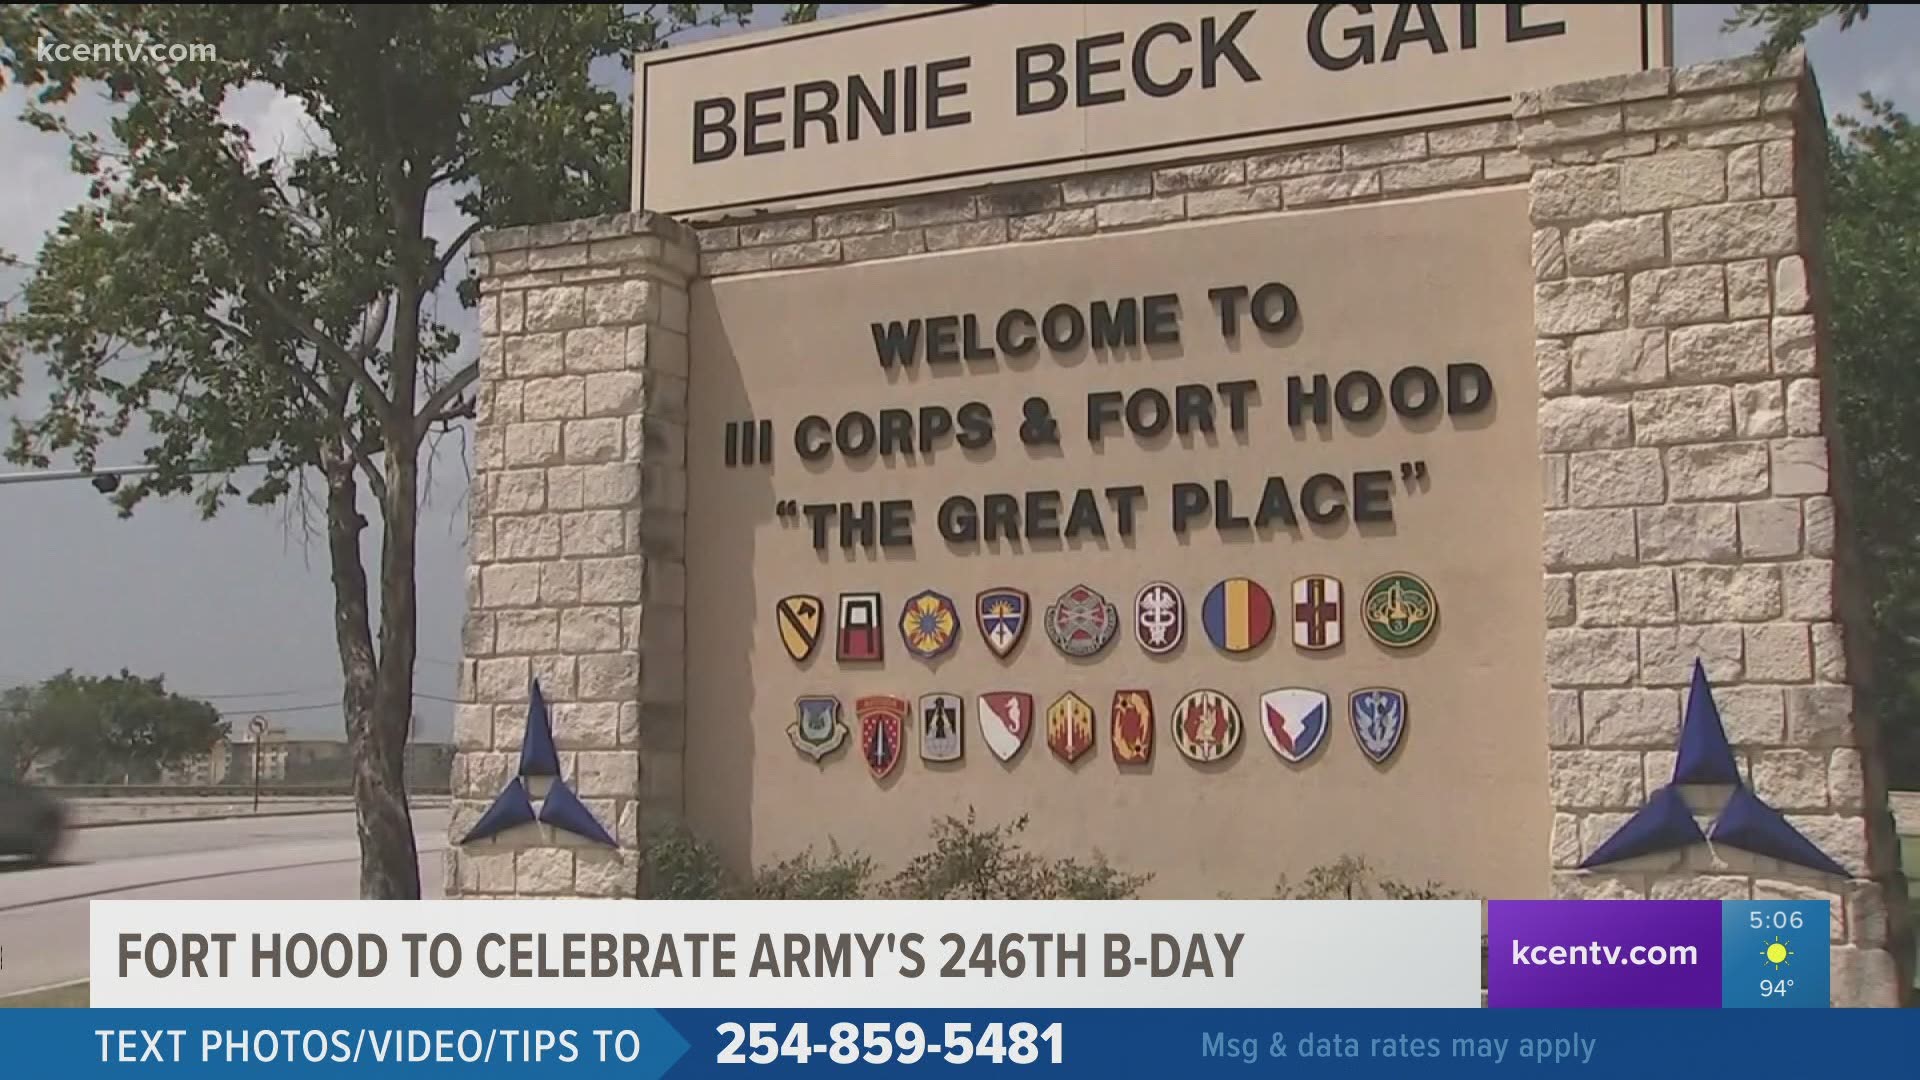 The military post has a full list of events planned for June 14 to celebrate the Army's birthday.